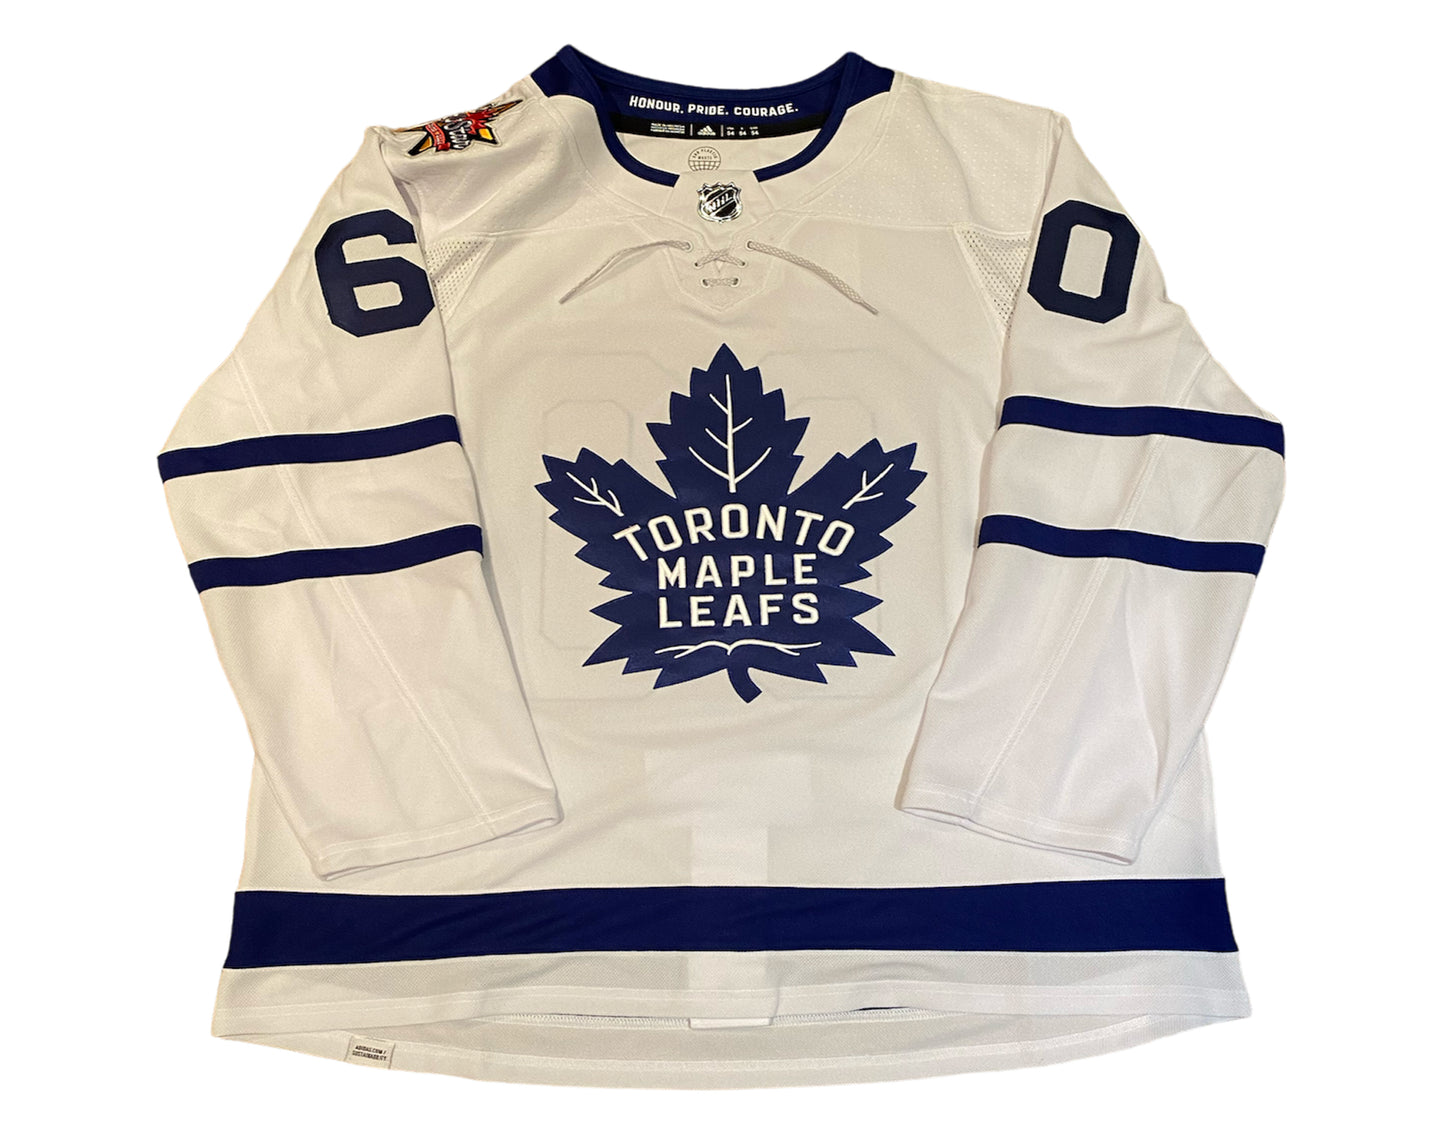 Joseph Woll Autographed Toronto Maple Leafs Away White Adidas Jersey w/ 2024 ASG Patch